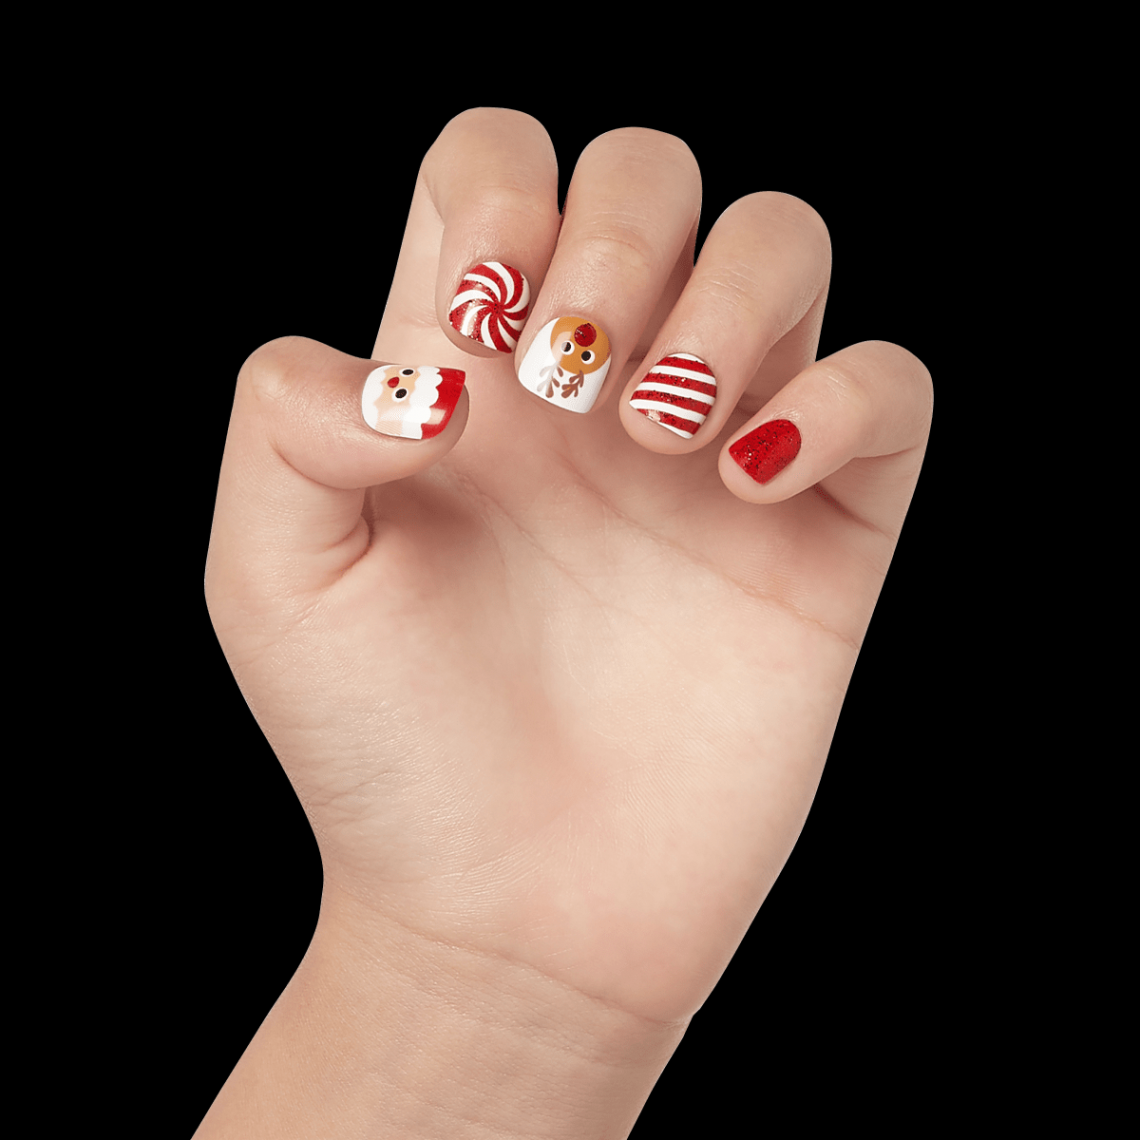 imPRESS MINI Holiday Press-On Nails for Kids, No Glue Needed, Red